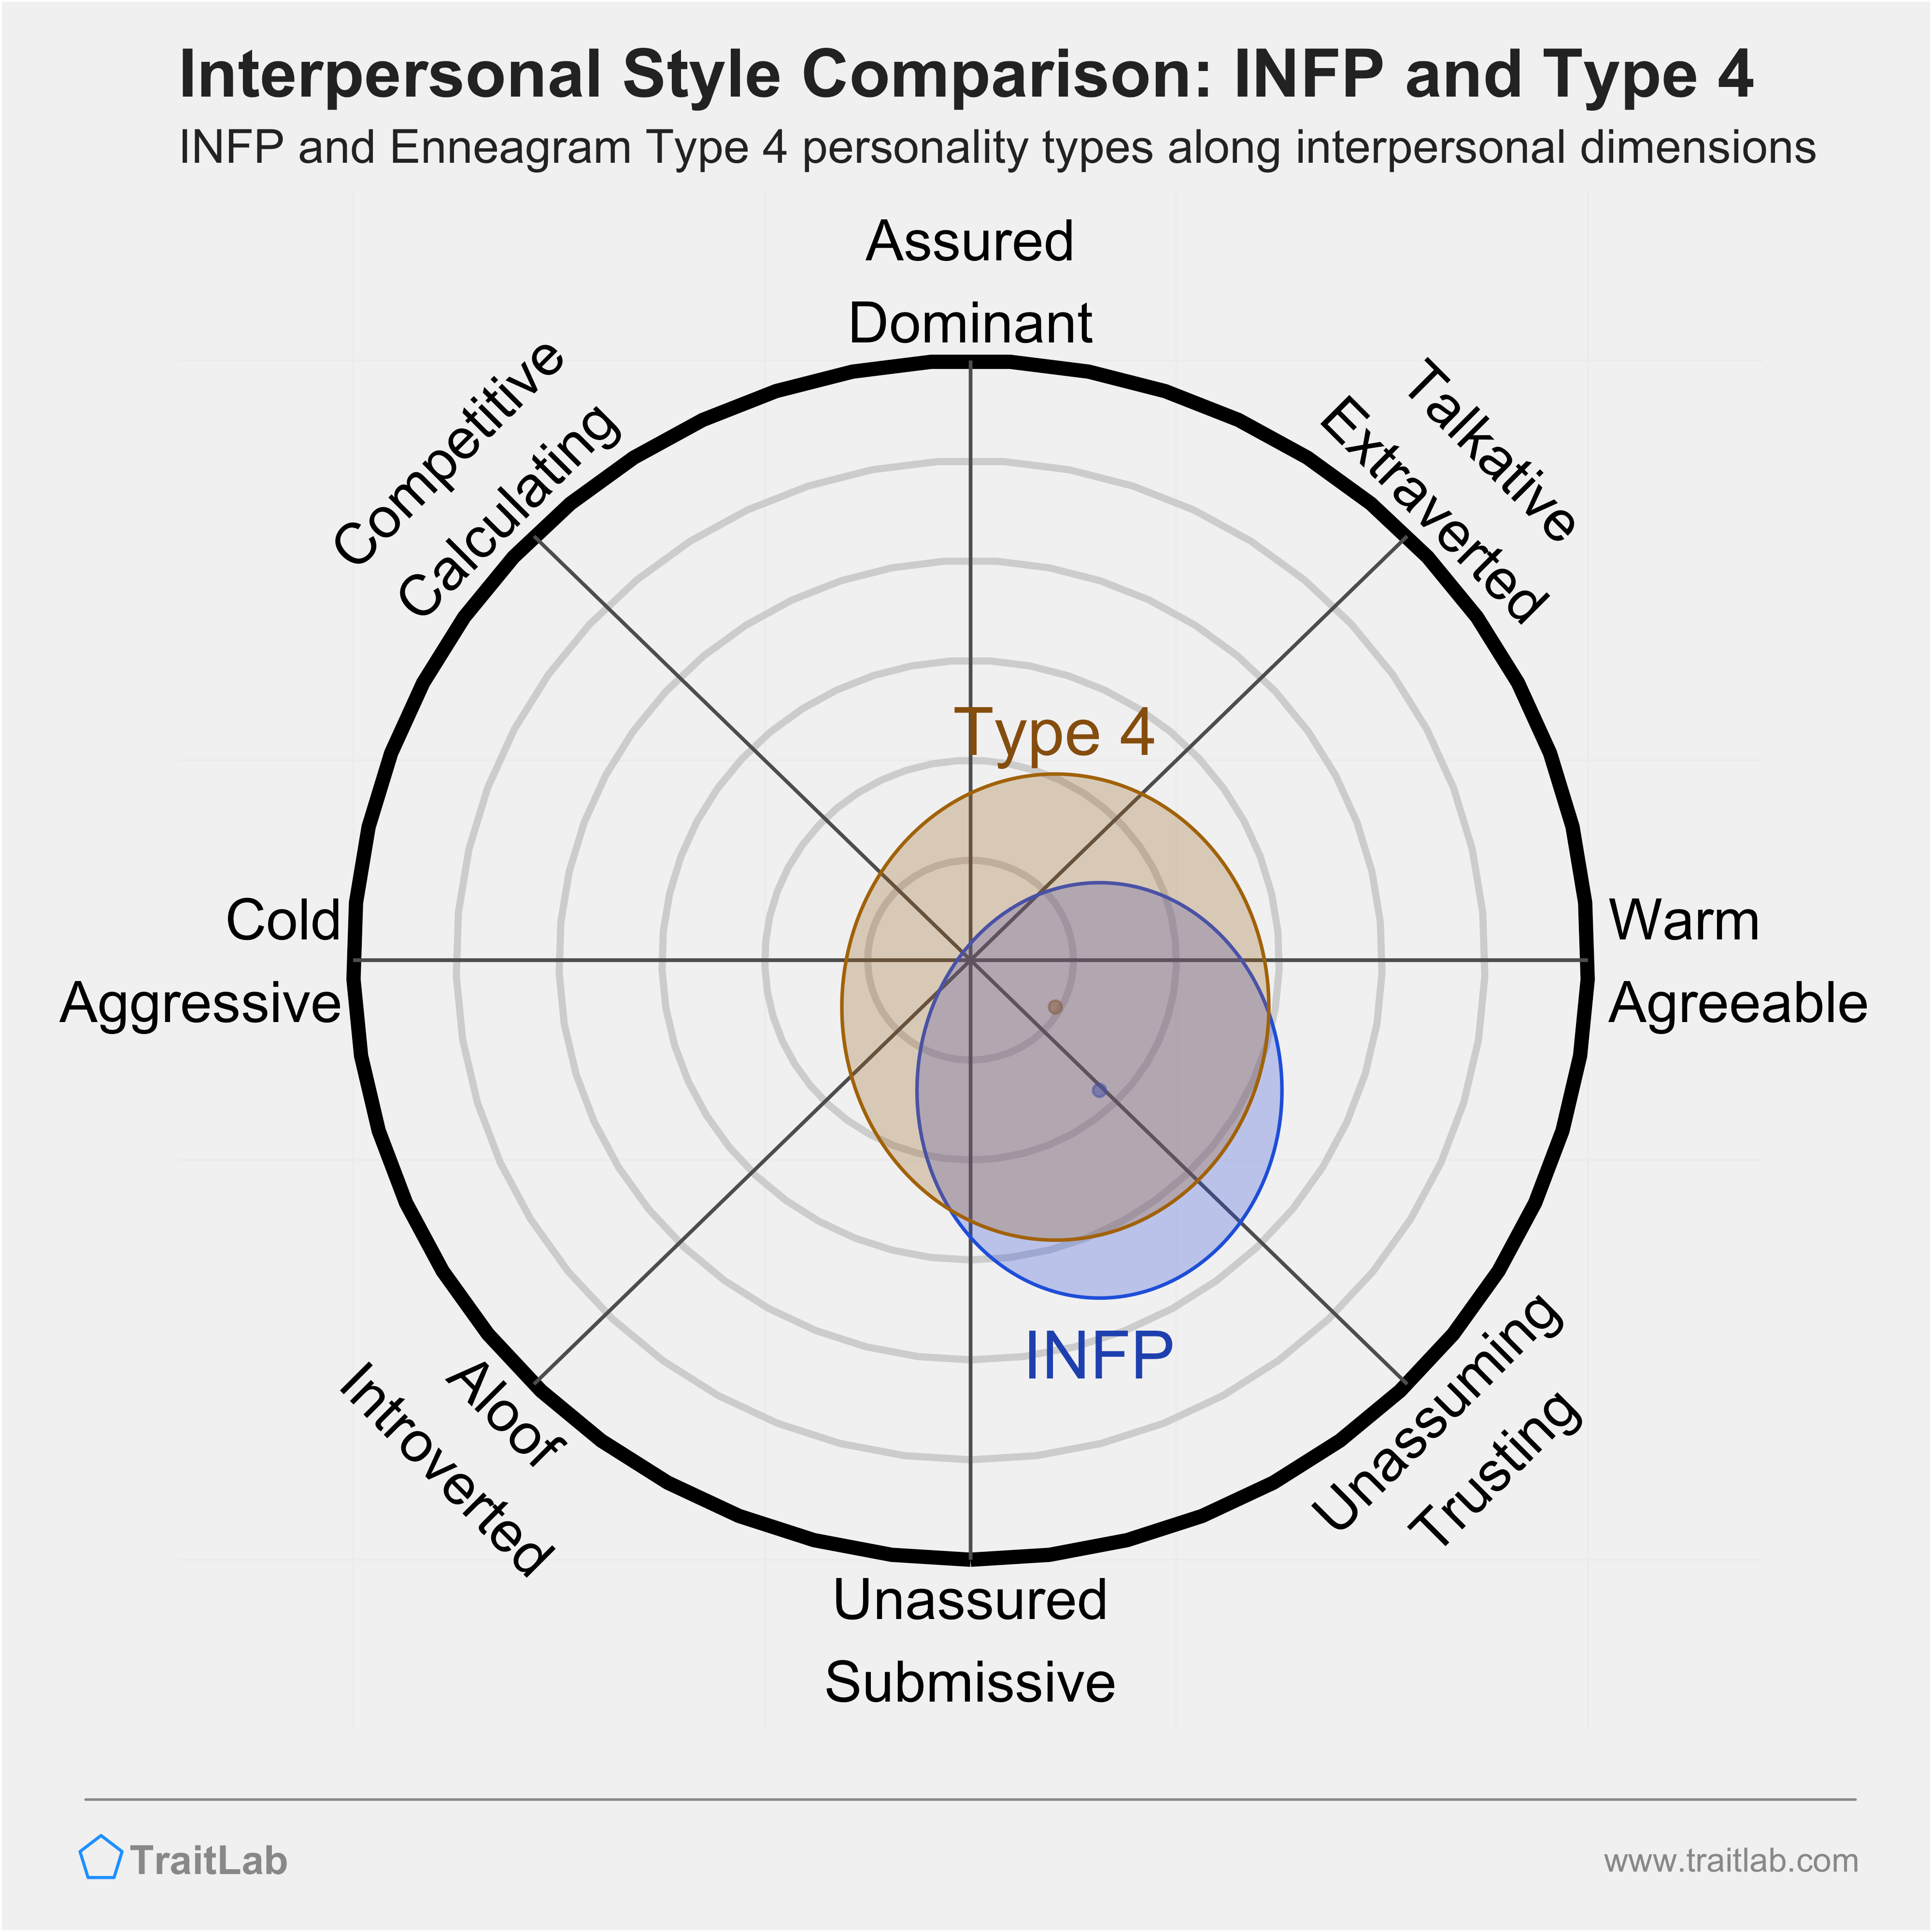 Enneagram INFP and Type 4 comparison across interpersonal dimensions